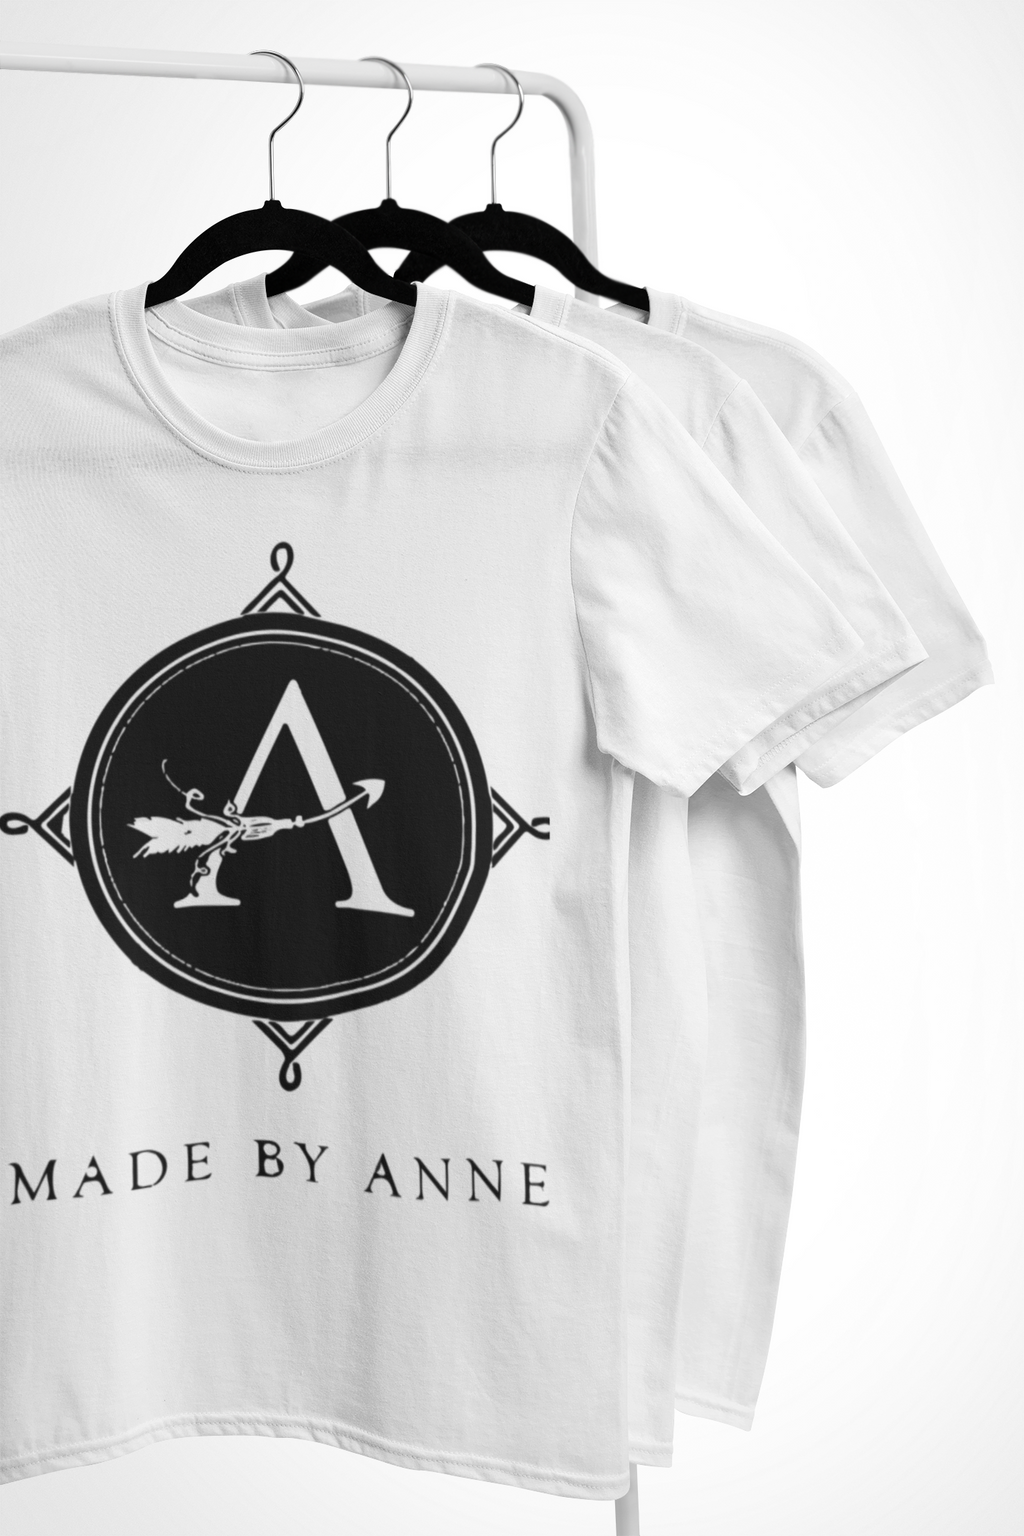 Made By Anne Signature'd Tee Shirt